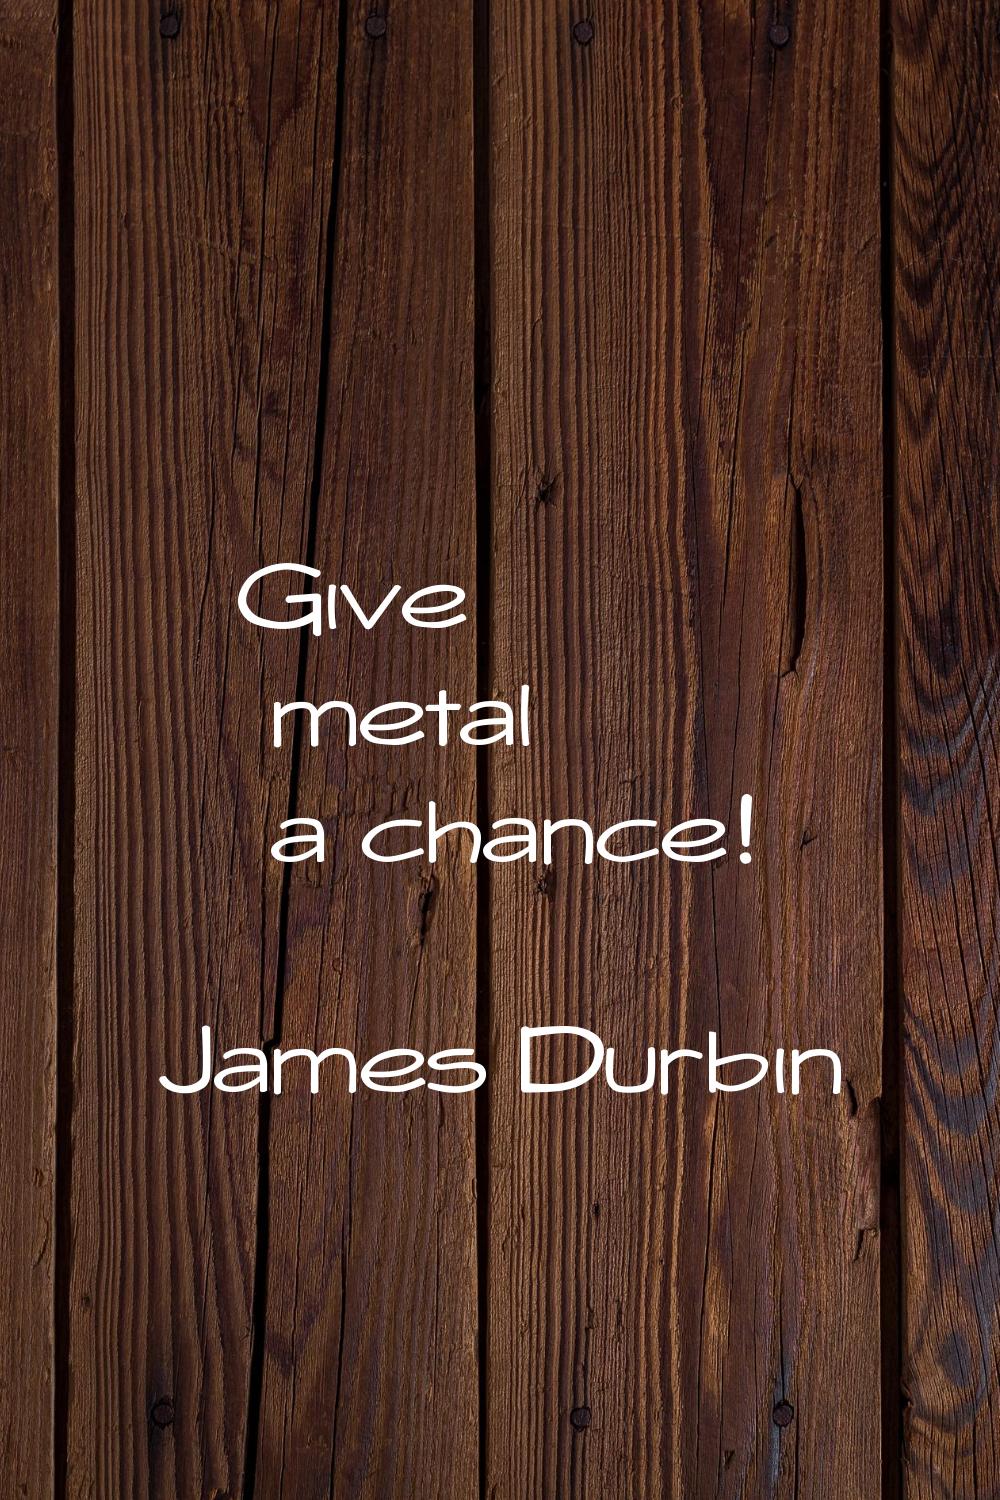 Give metal a chance!